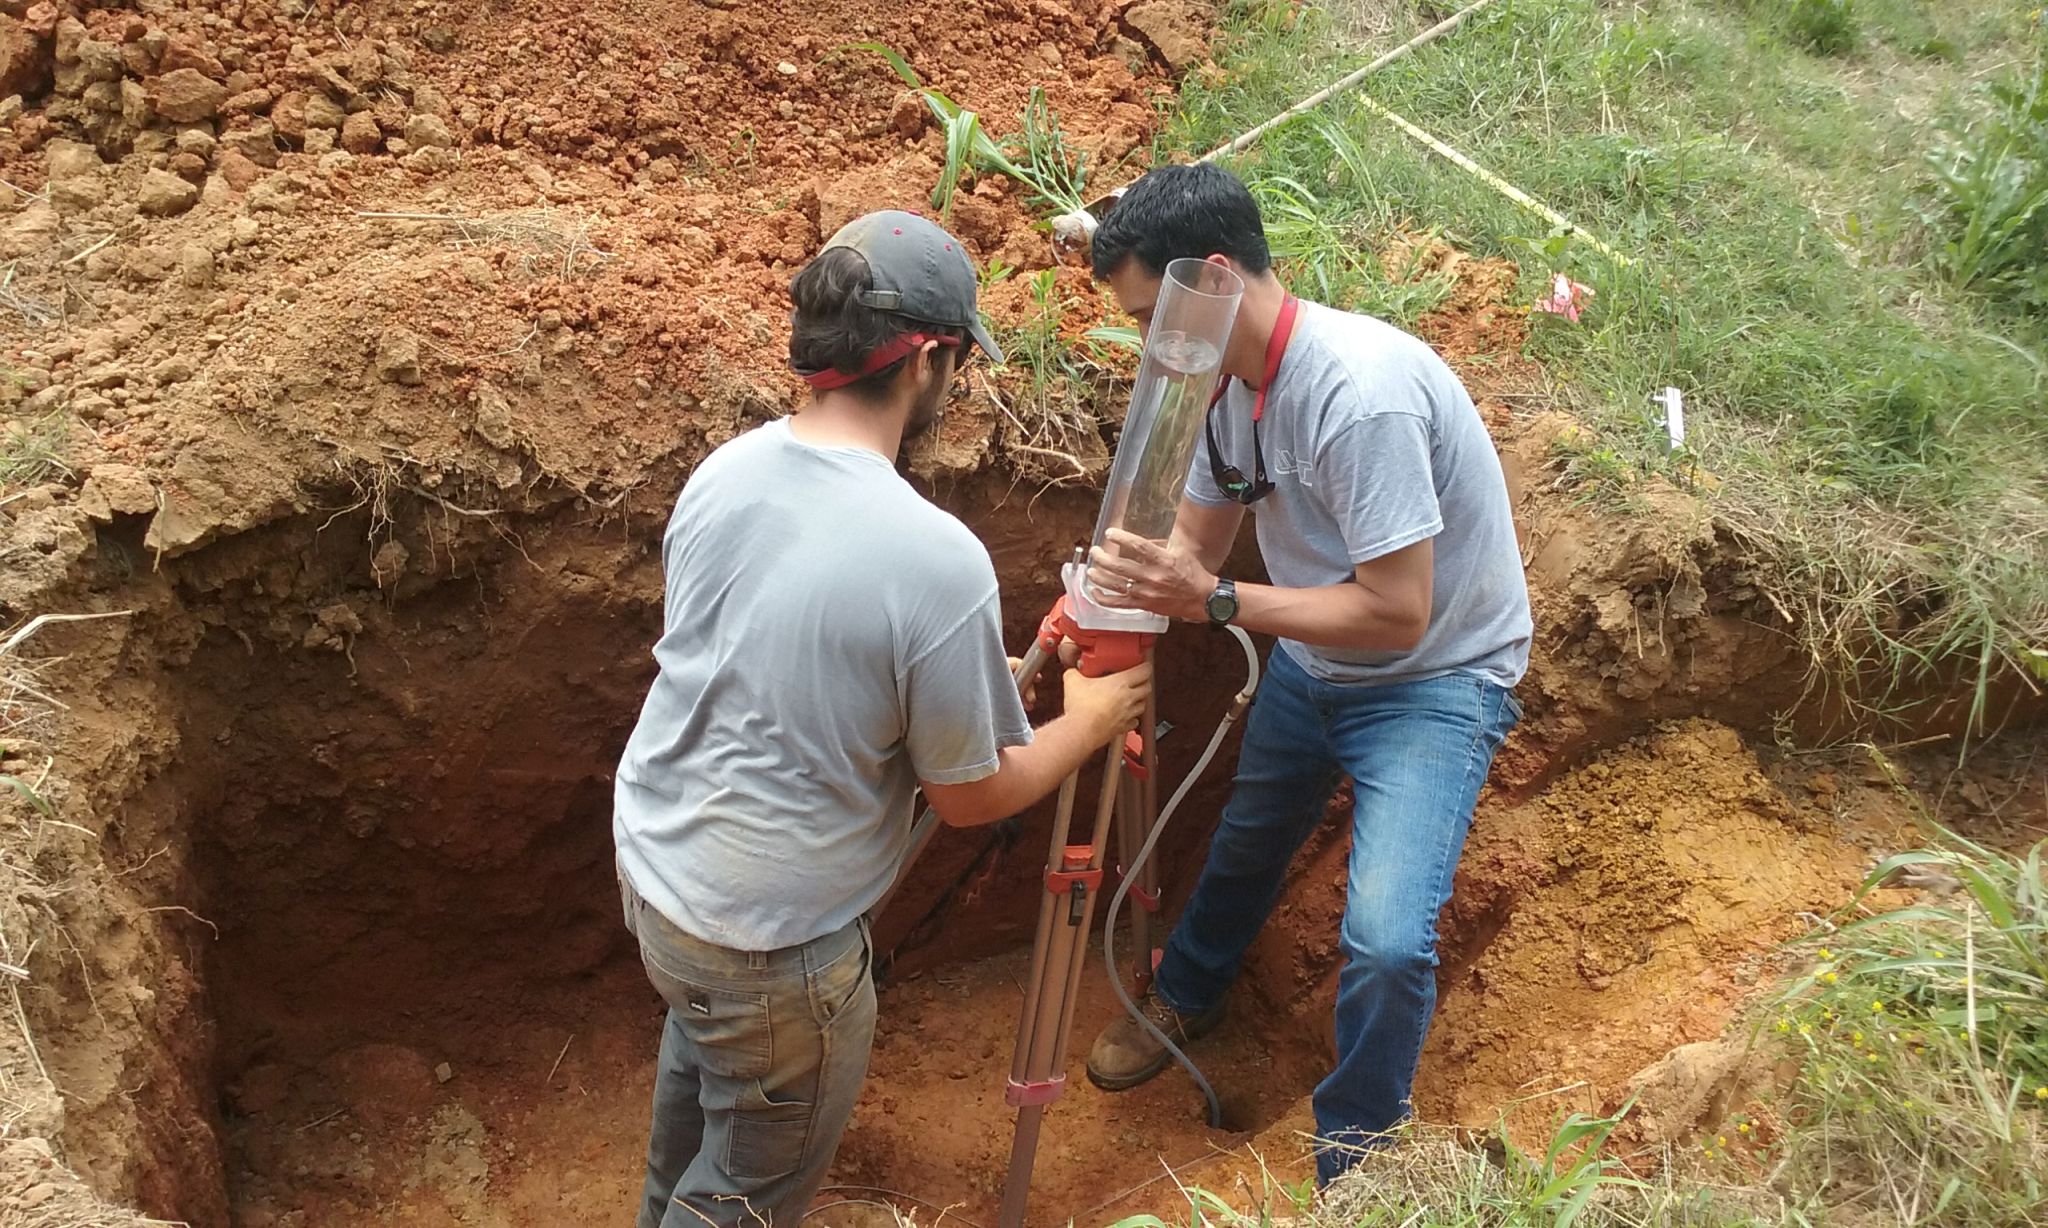 Two soil scientists take field samples